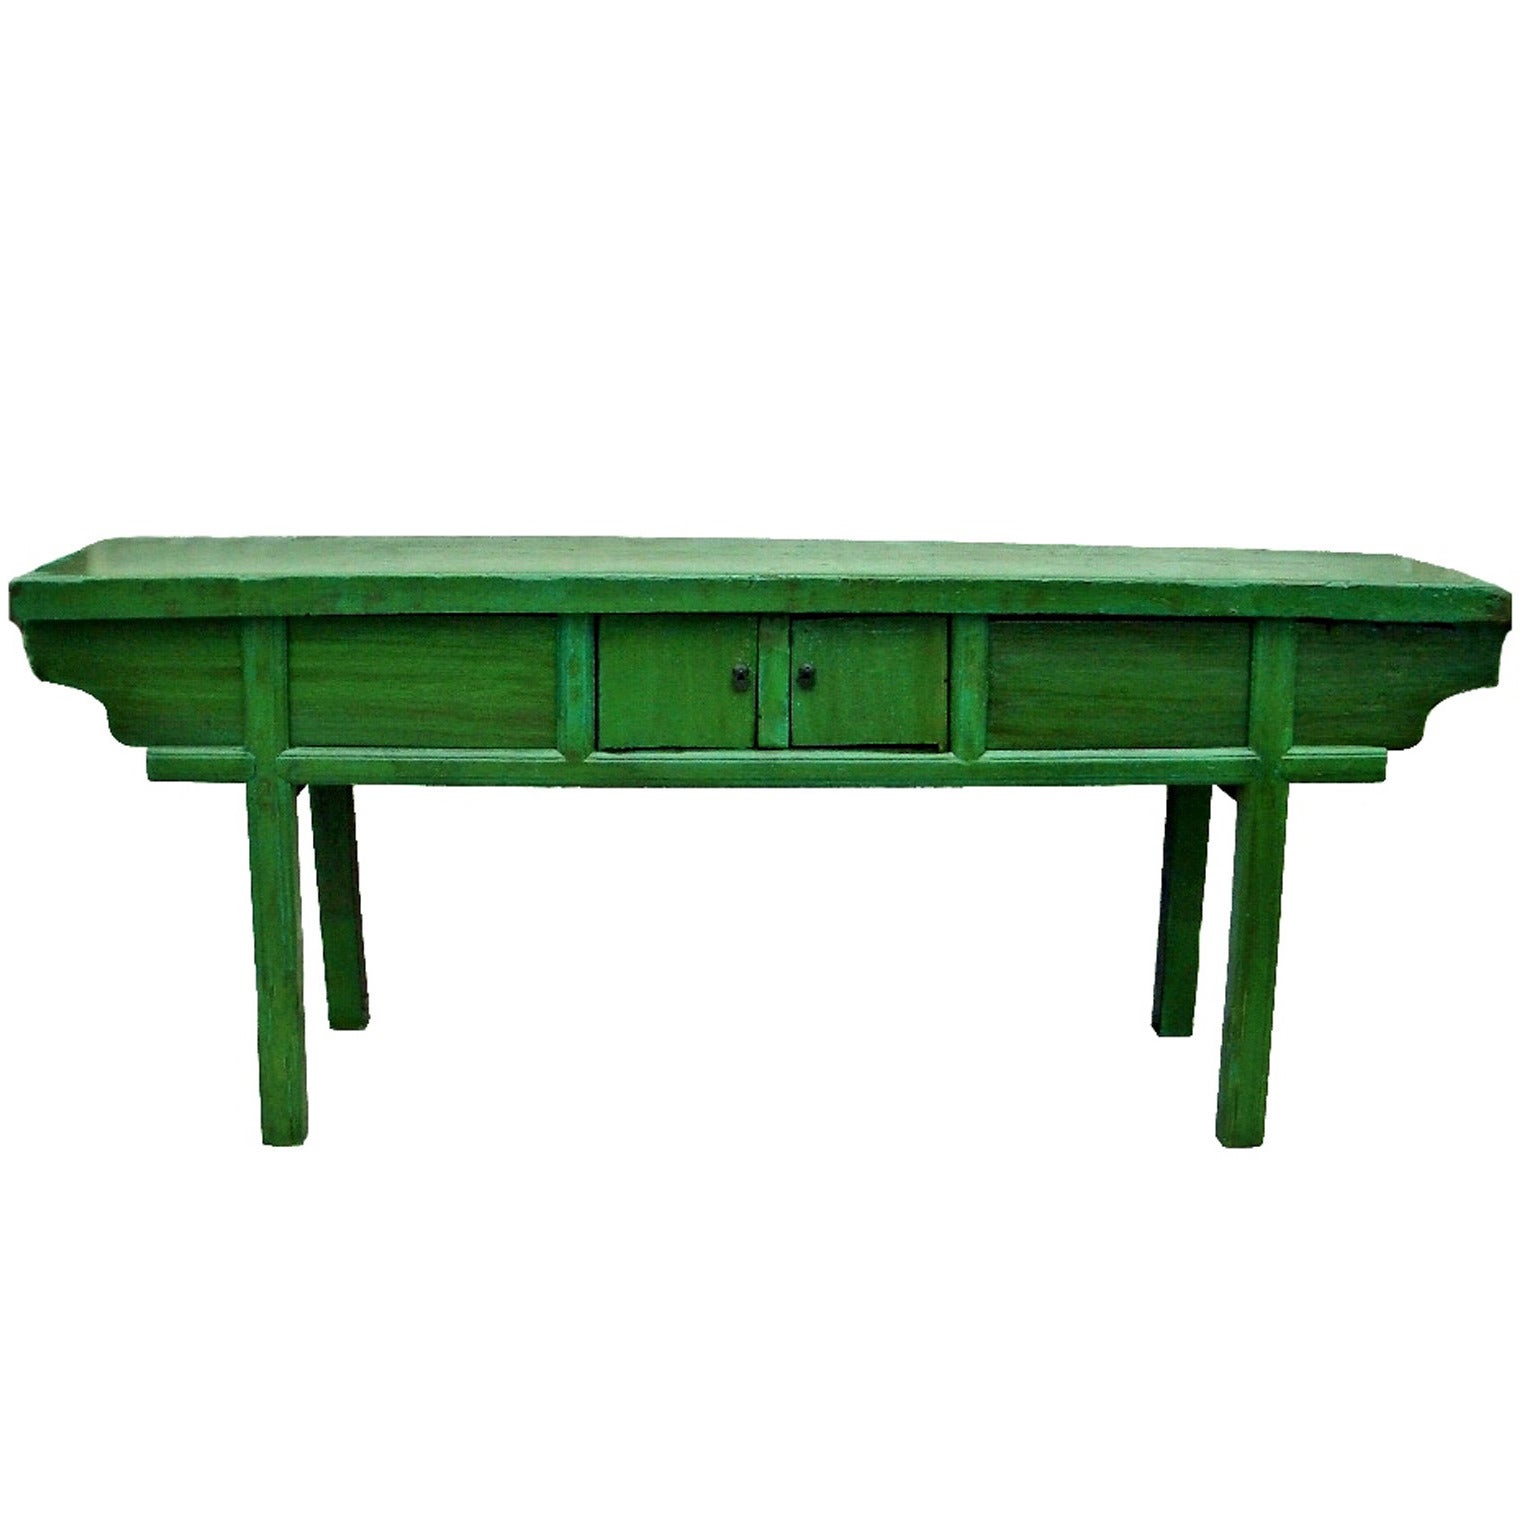 19th Century Green Rustic Thick Wood Table For Sale